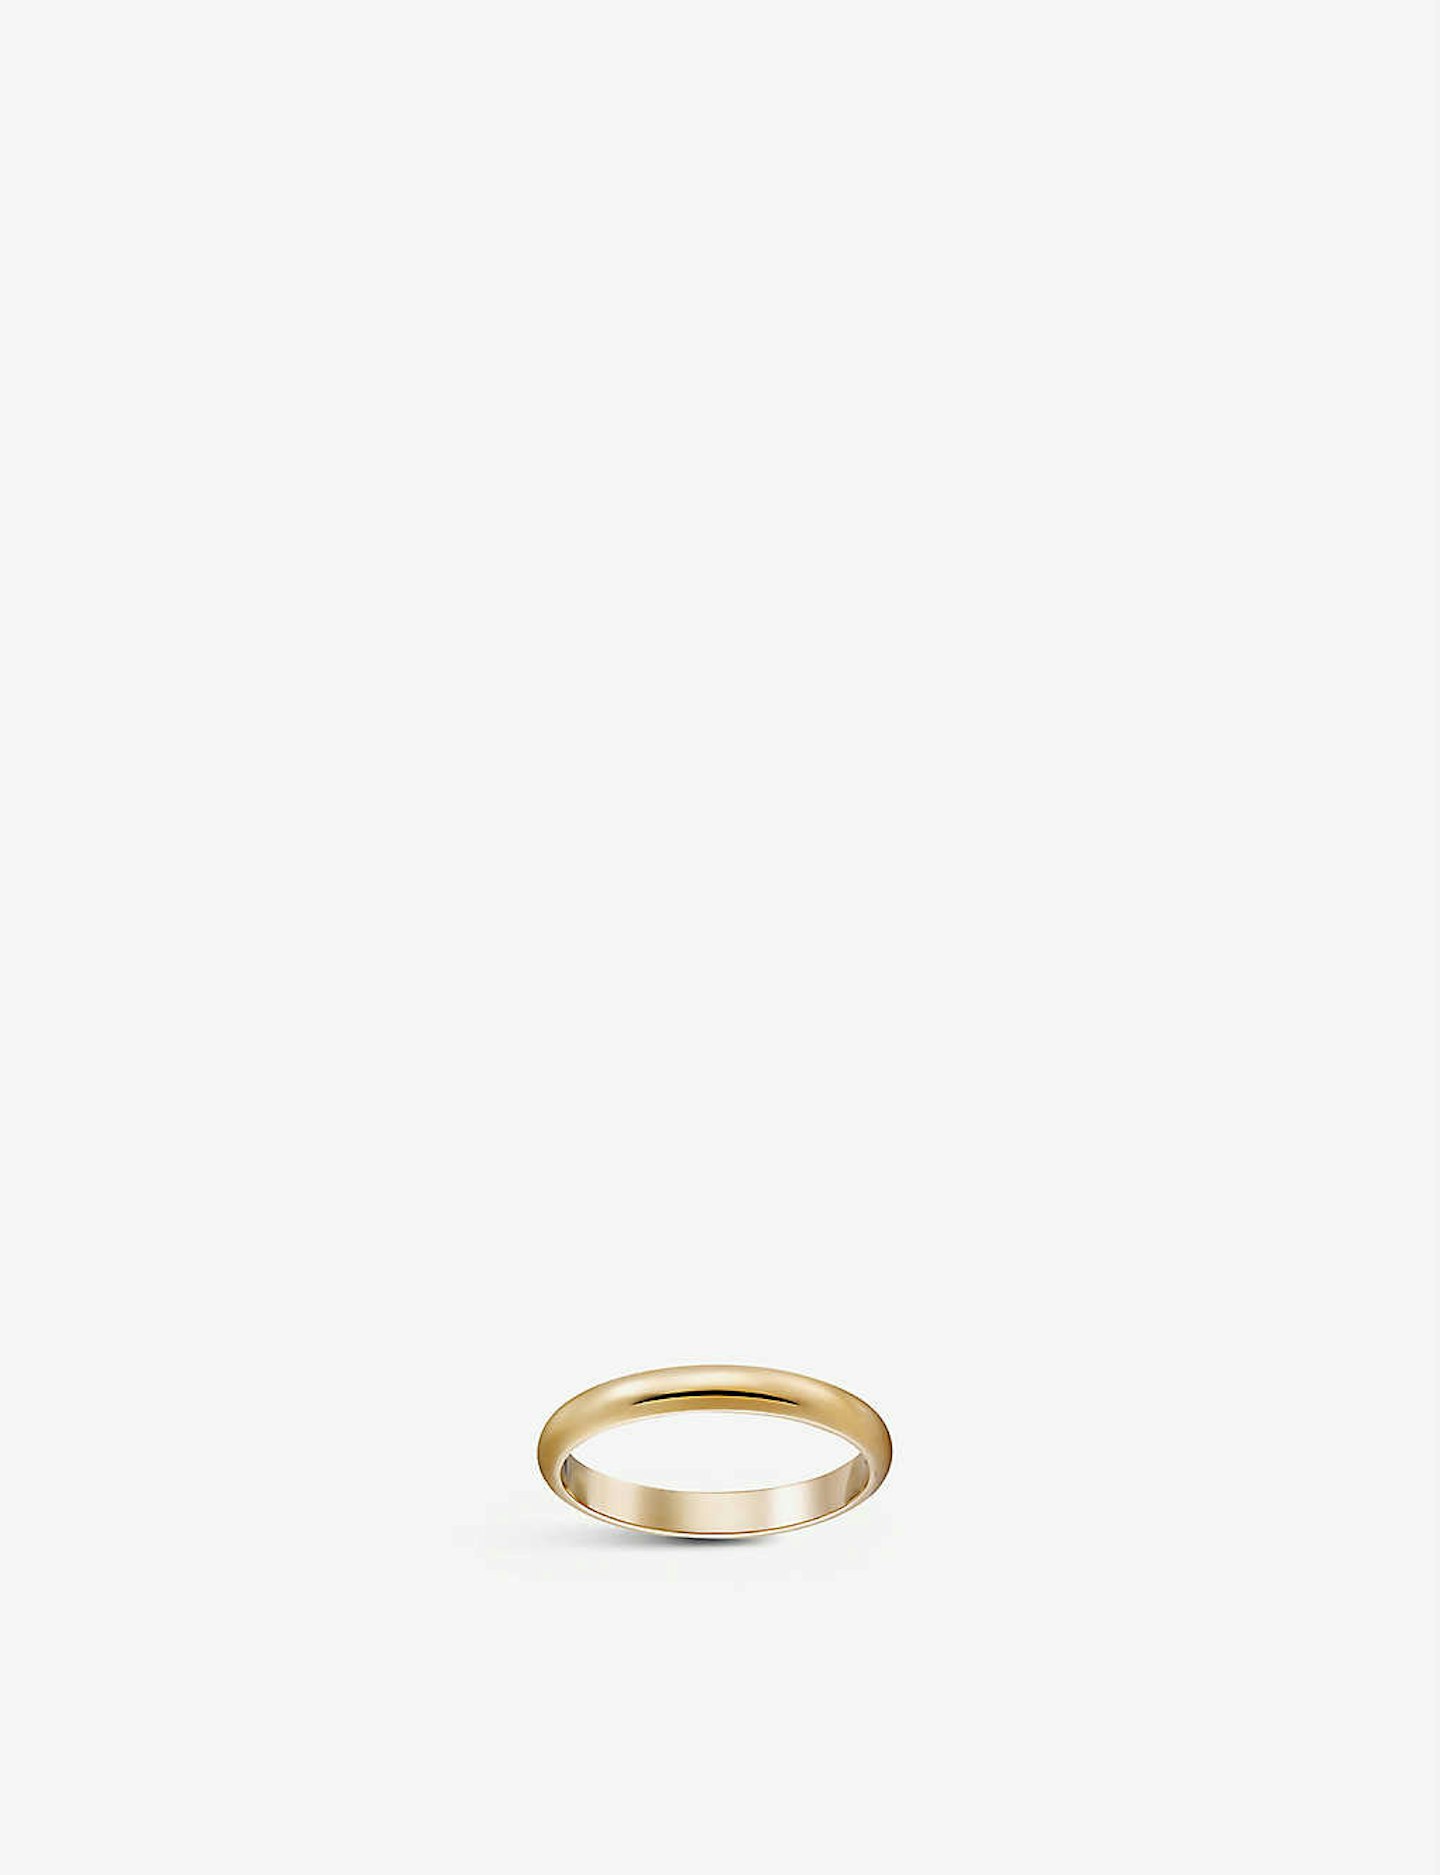 Cartier, 1895 18ct yellow-gold wedding ring